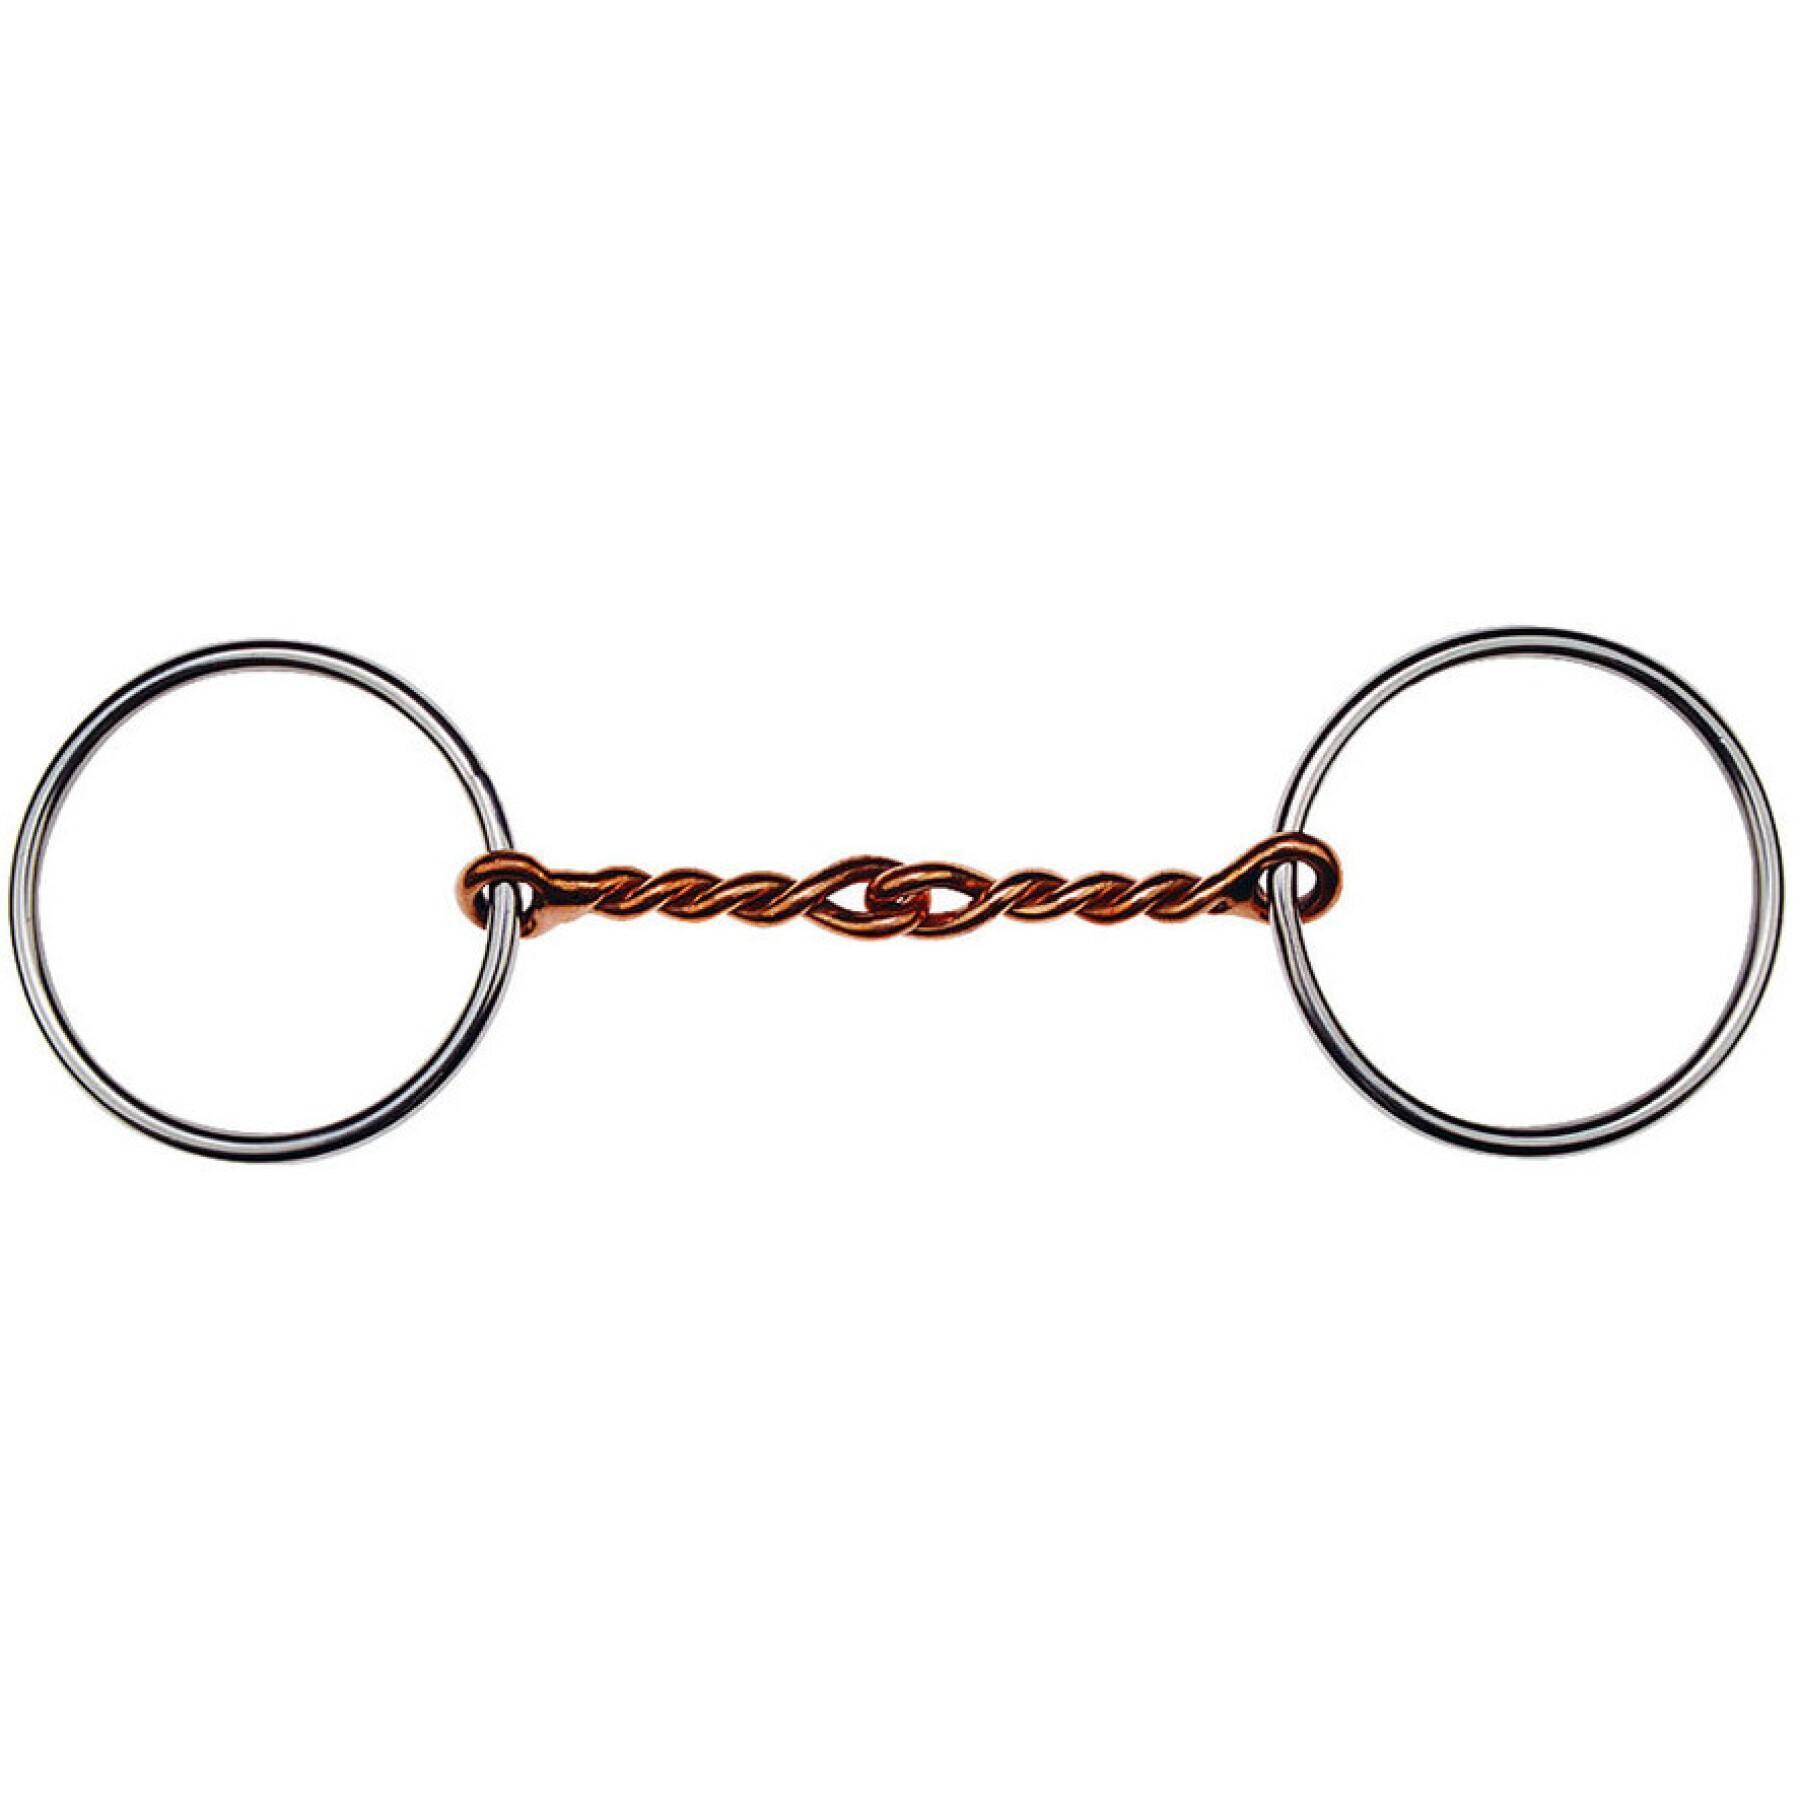 Two-ring snaffle bit twisted horse Feeling